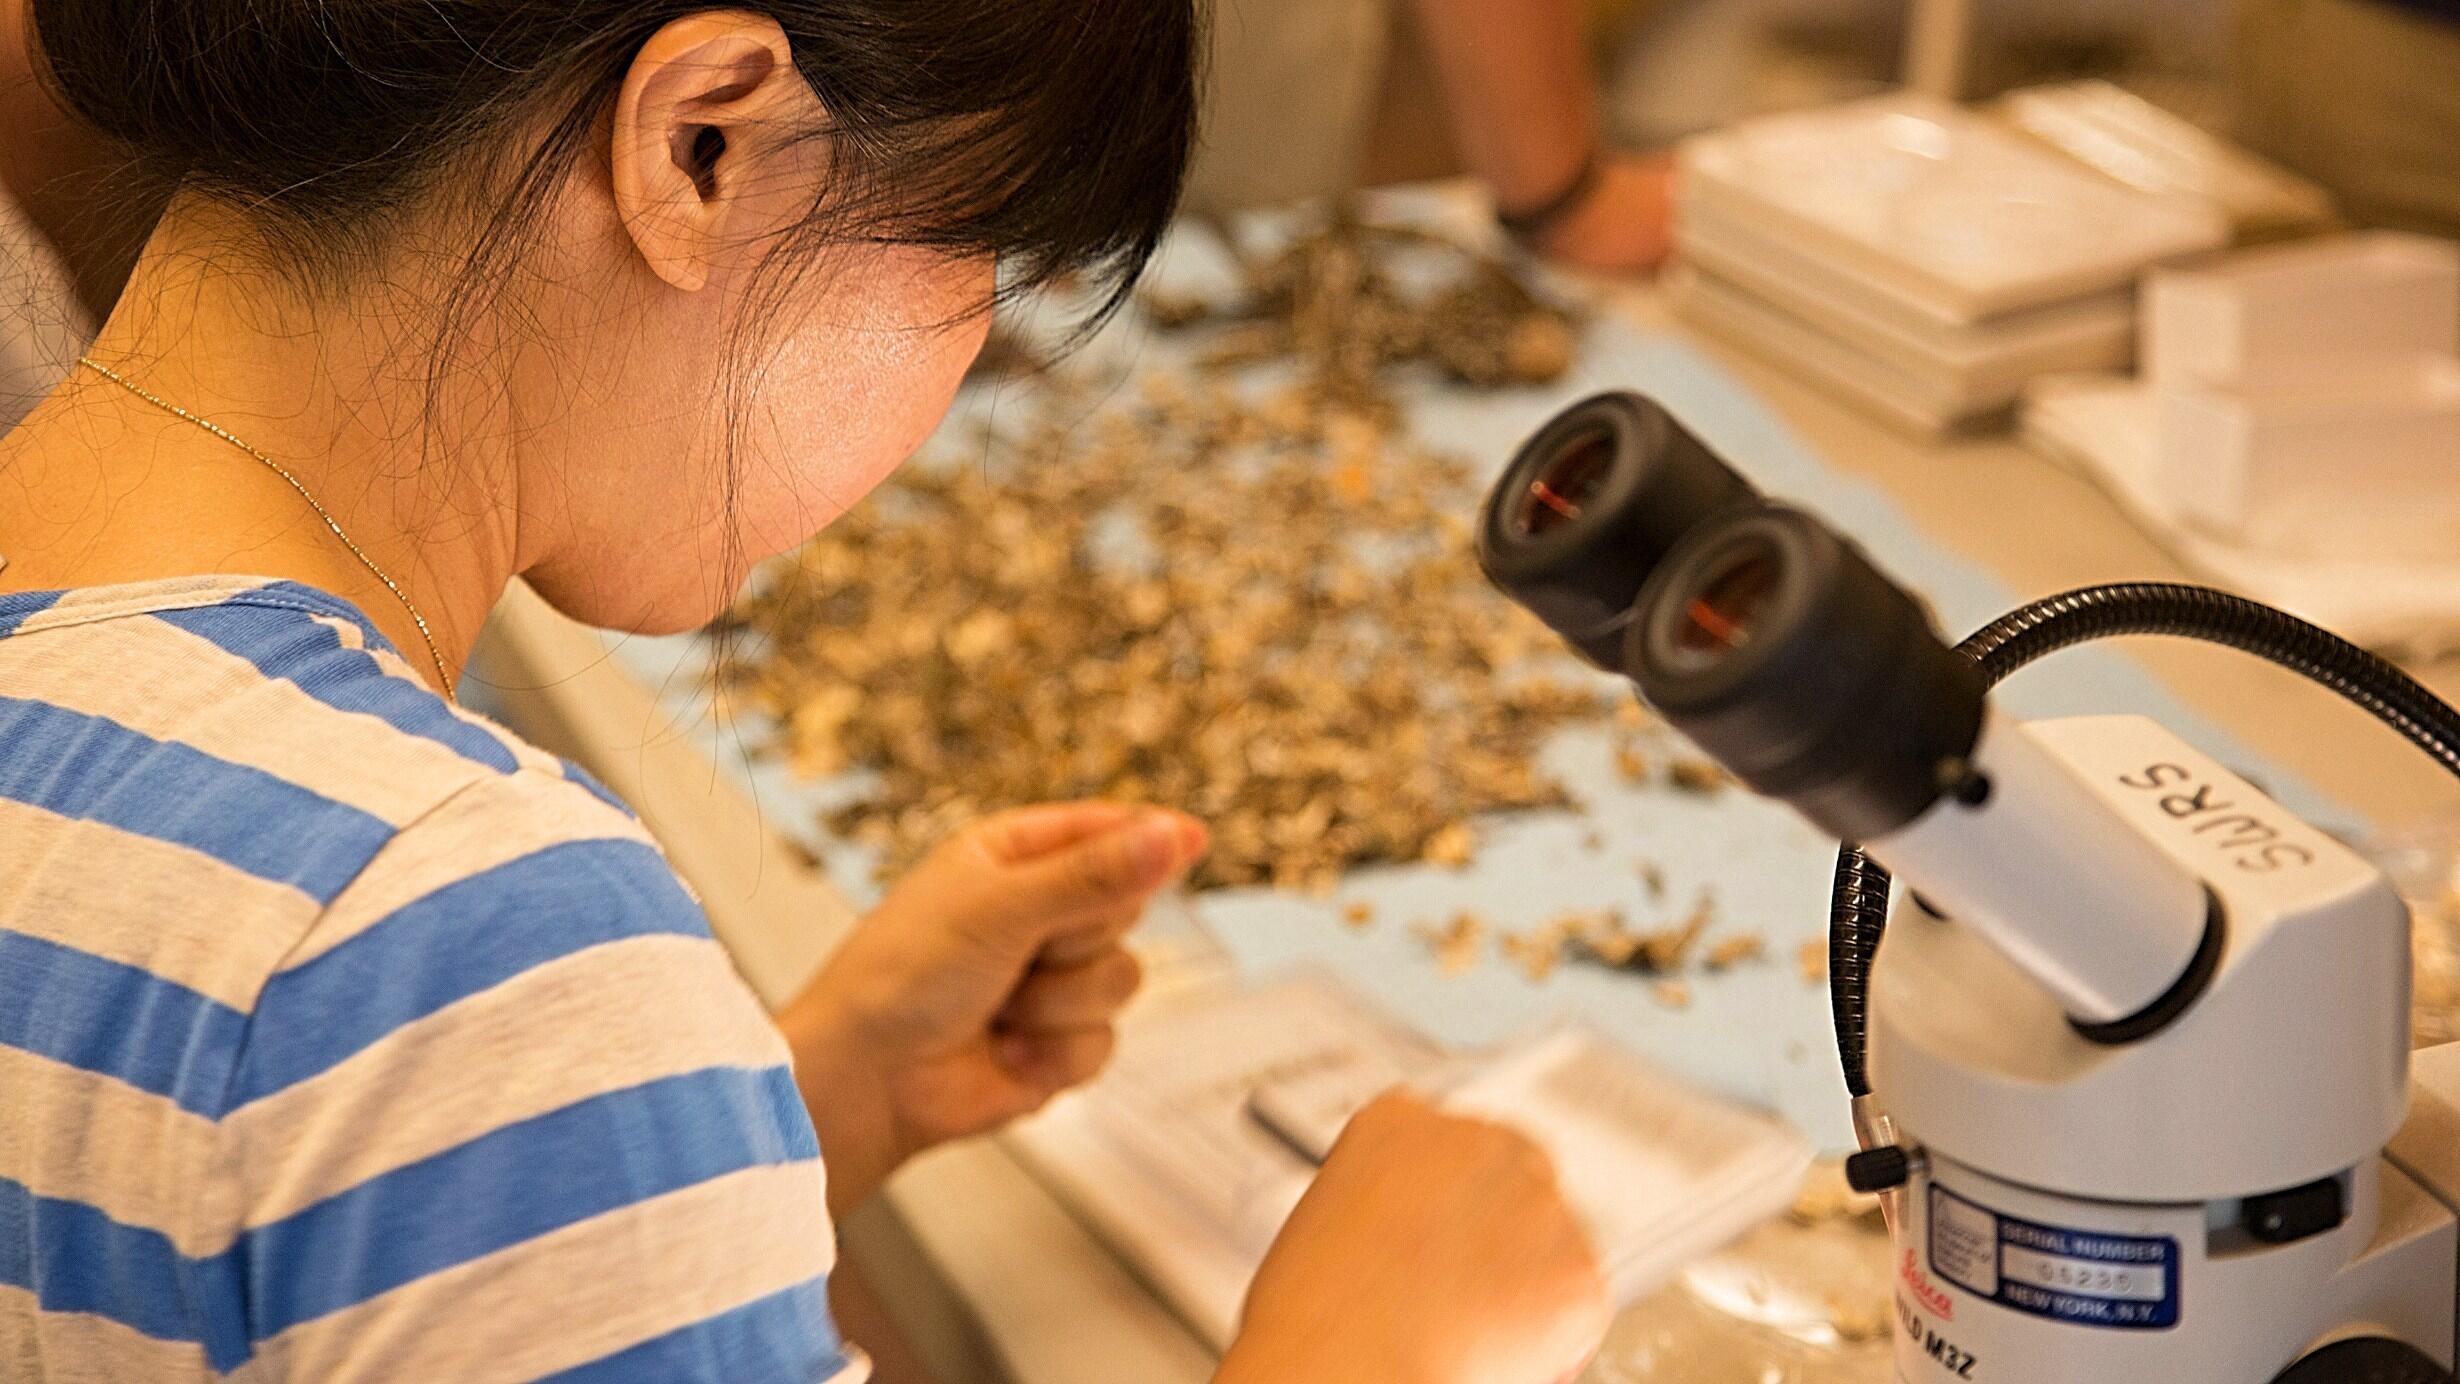 Woman at table looking at insects with a microscope in front of her.